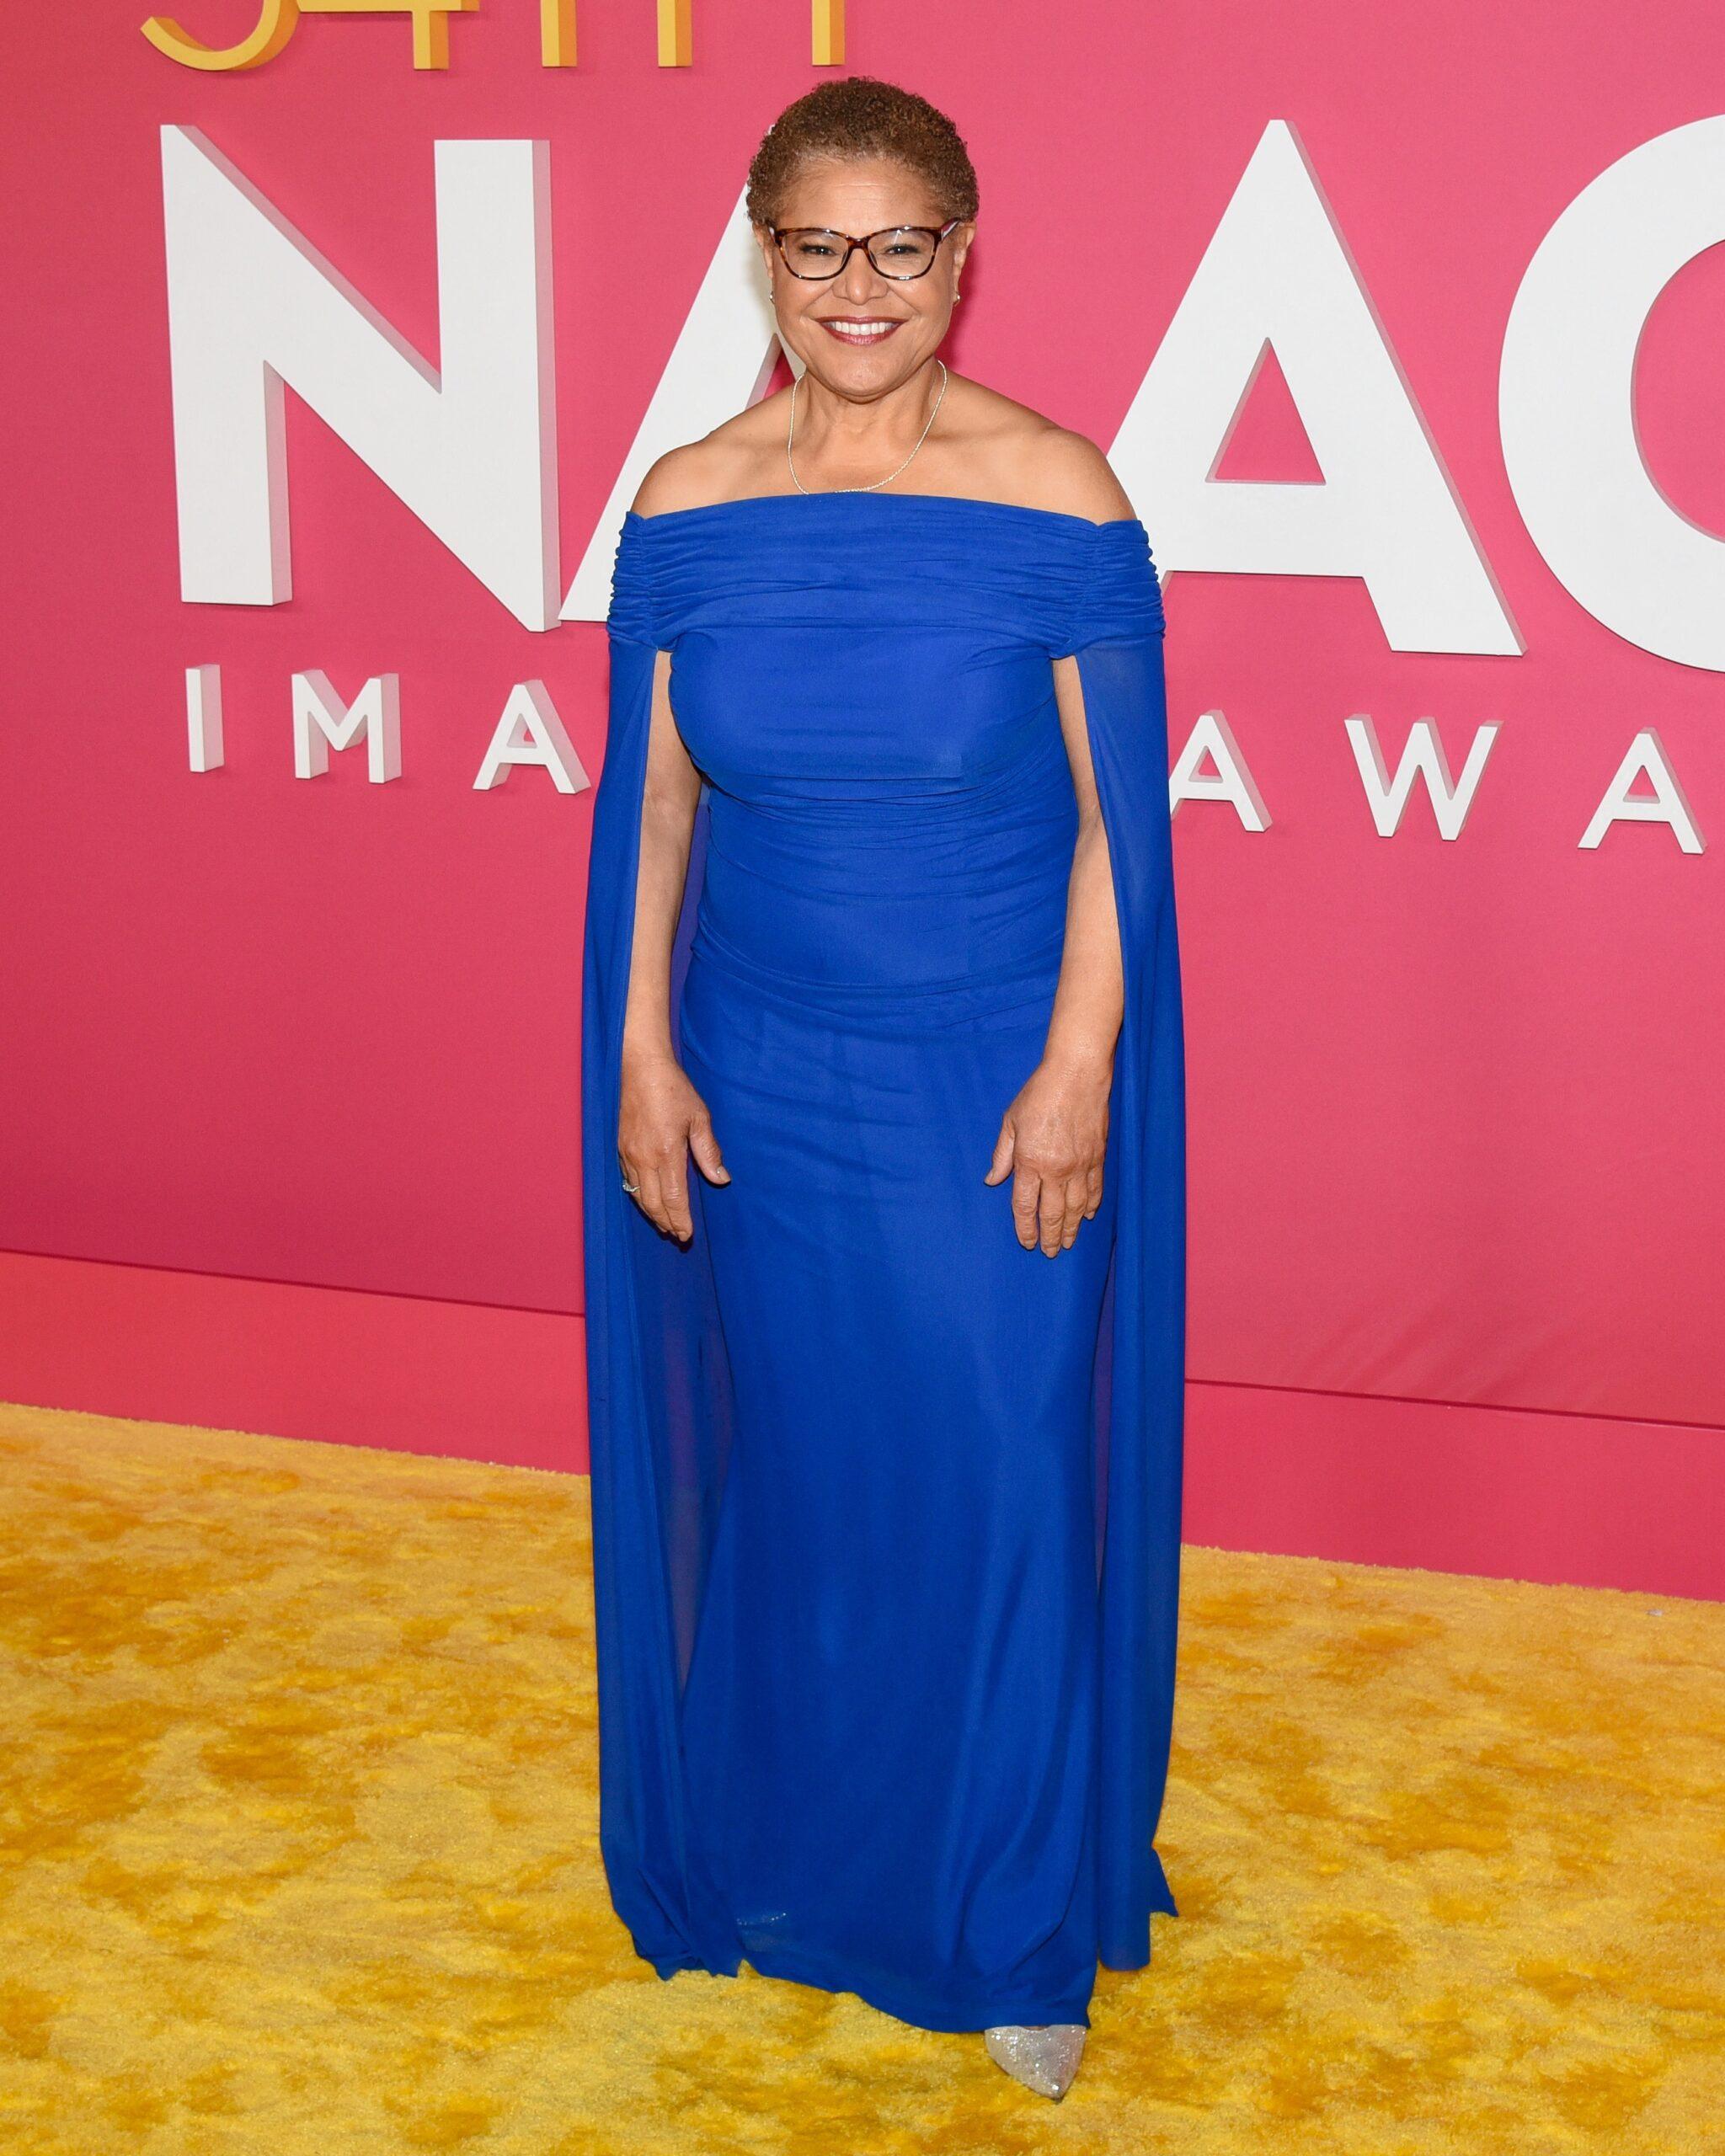 Mayor Karen Bass attended the 54th NAACP Image Awards